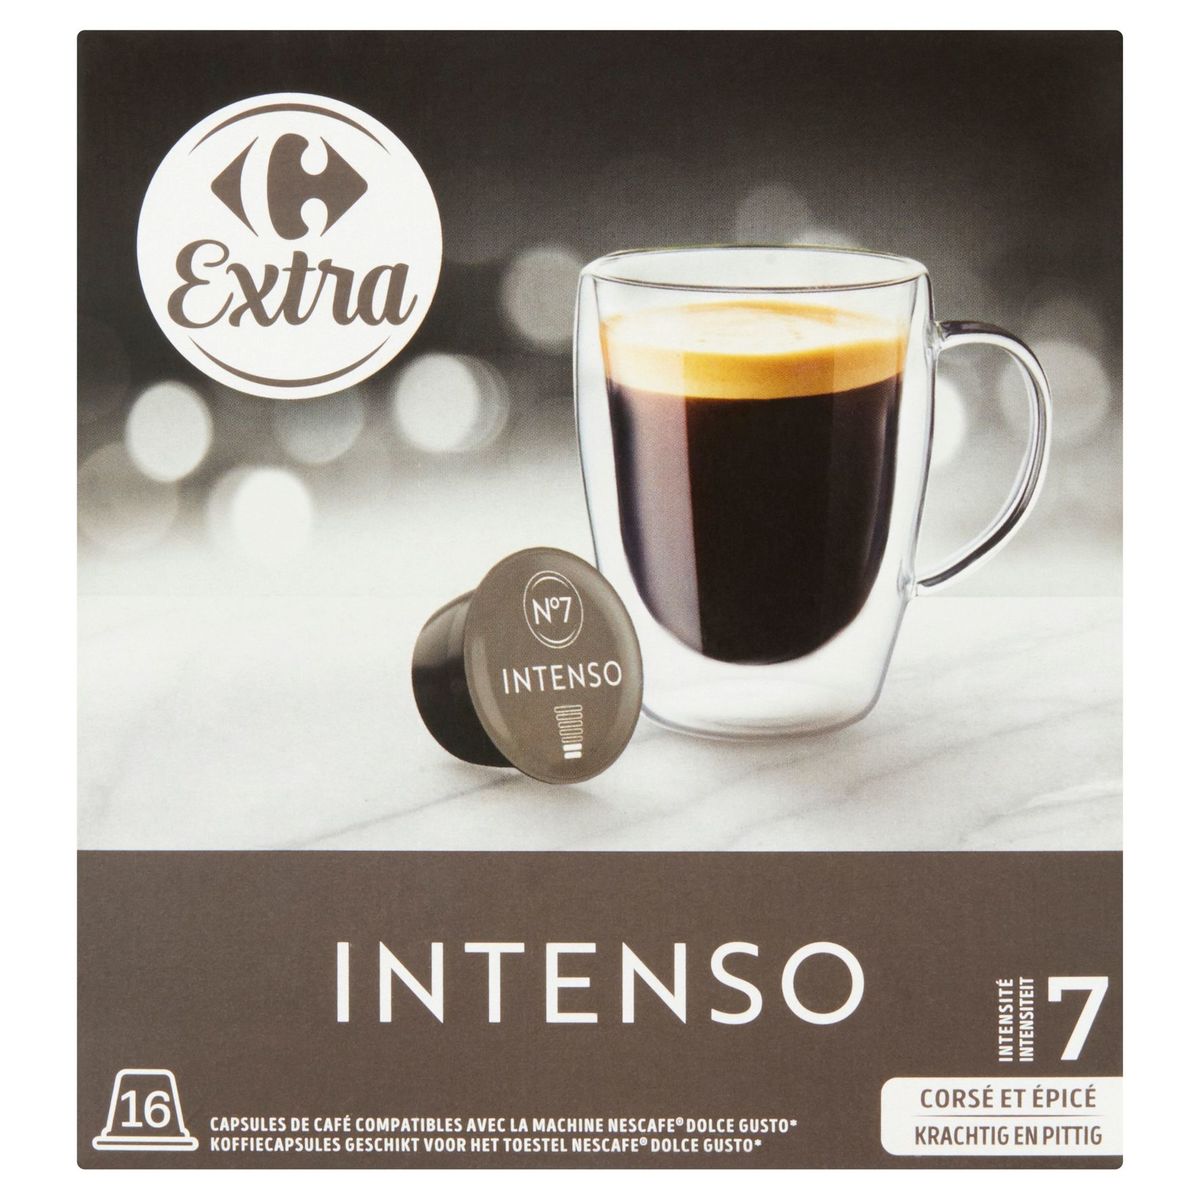 Carrefour Extra Intenso 16 x 7.5 g